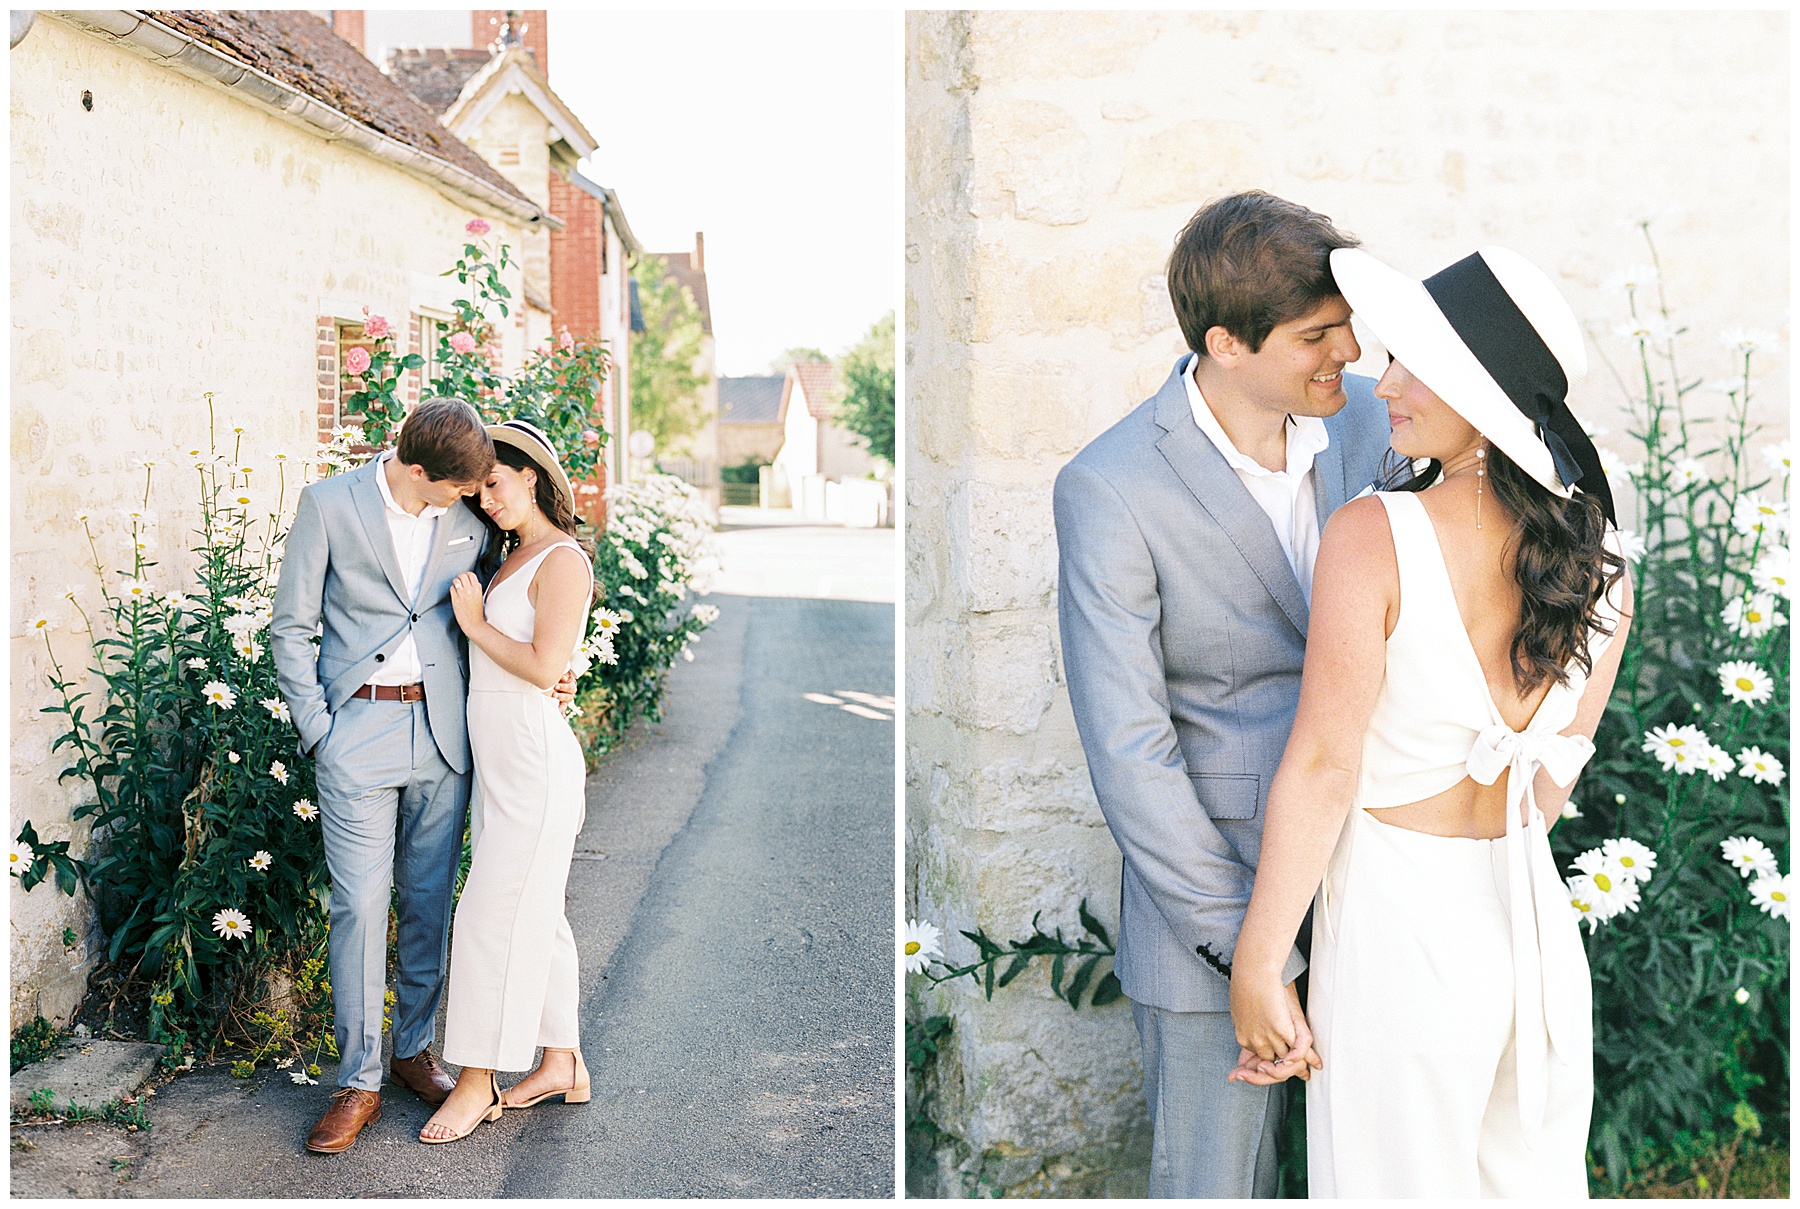 French Countryside Engagement | Normandy, France | Cat Murphy Photography | Colorado Wedding Photographer